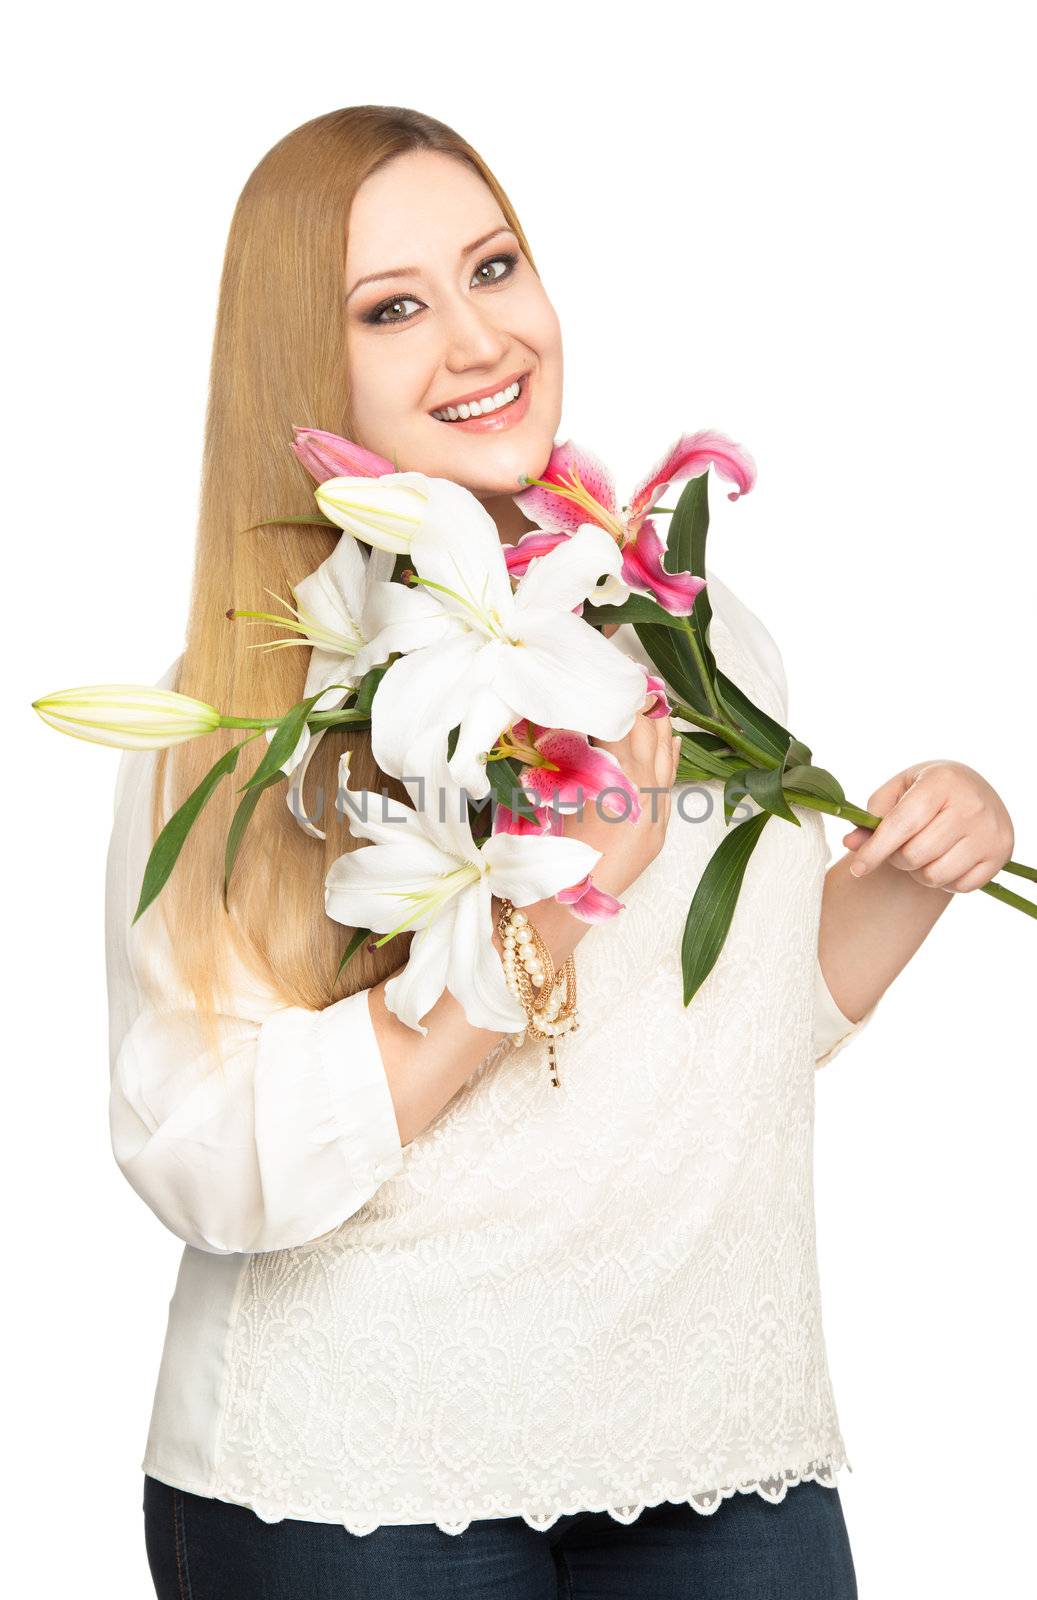 Overweight woman hodling lilies, smiling to camera, isolated on white